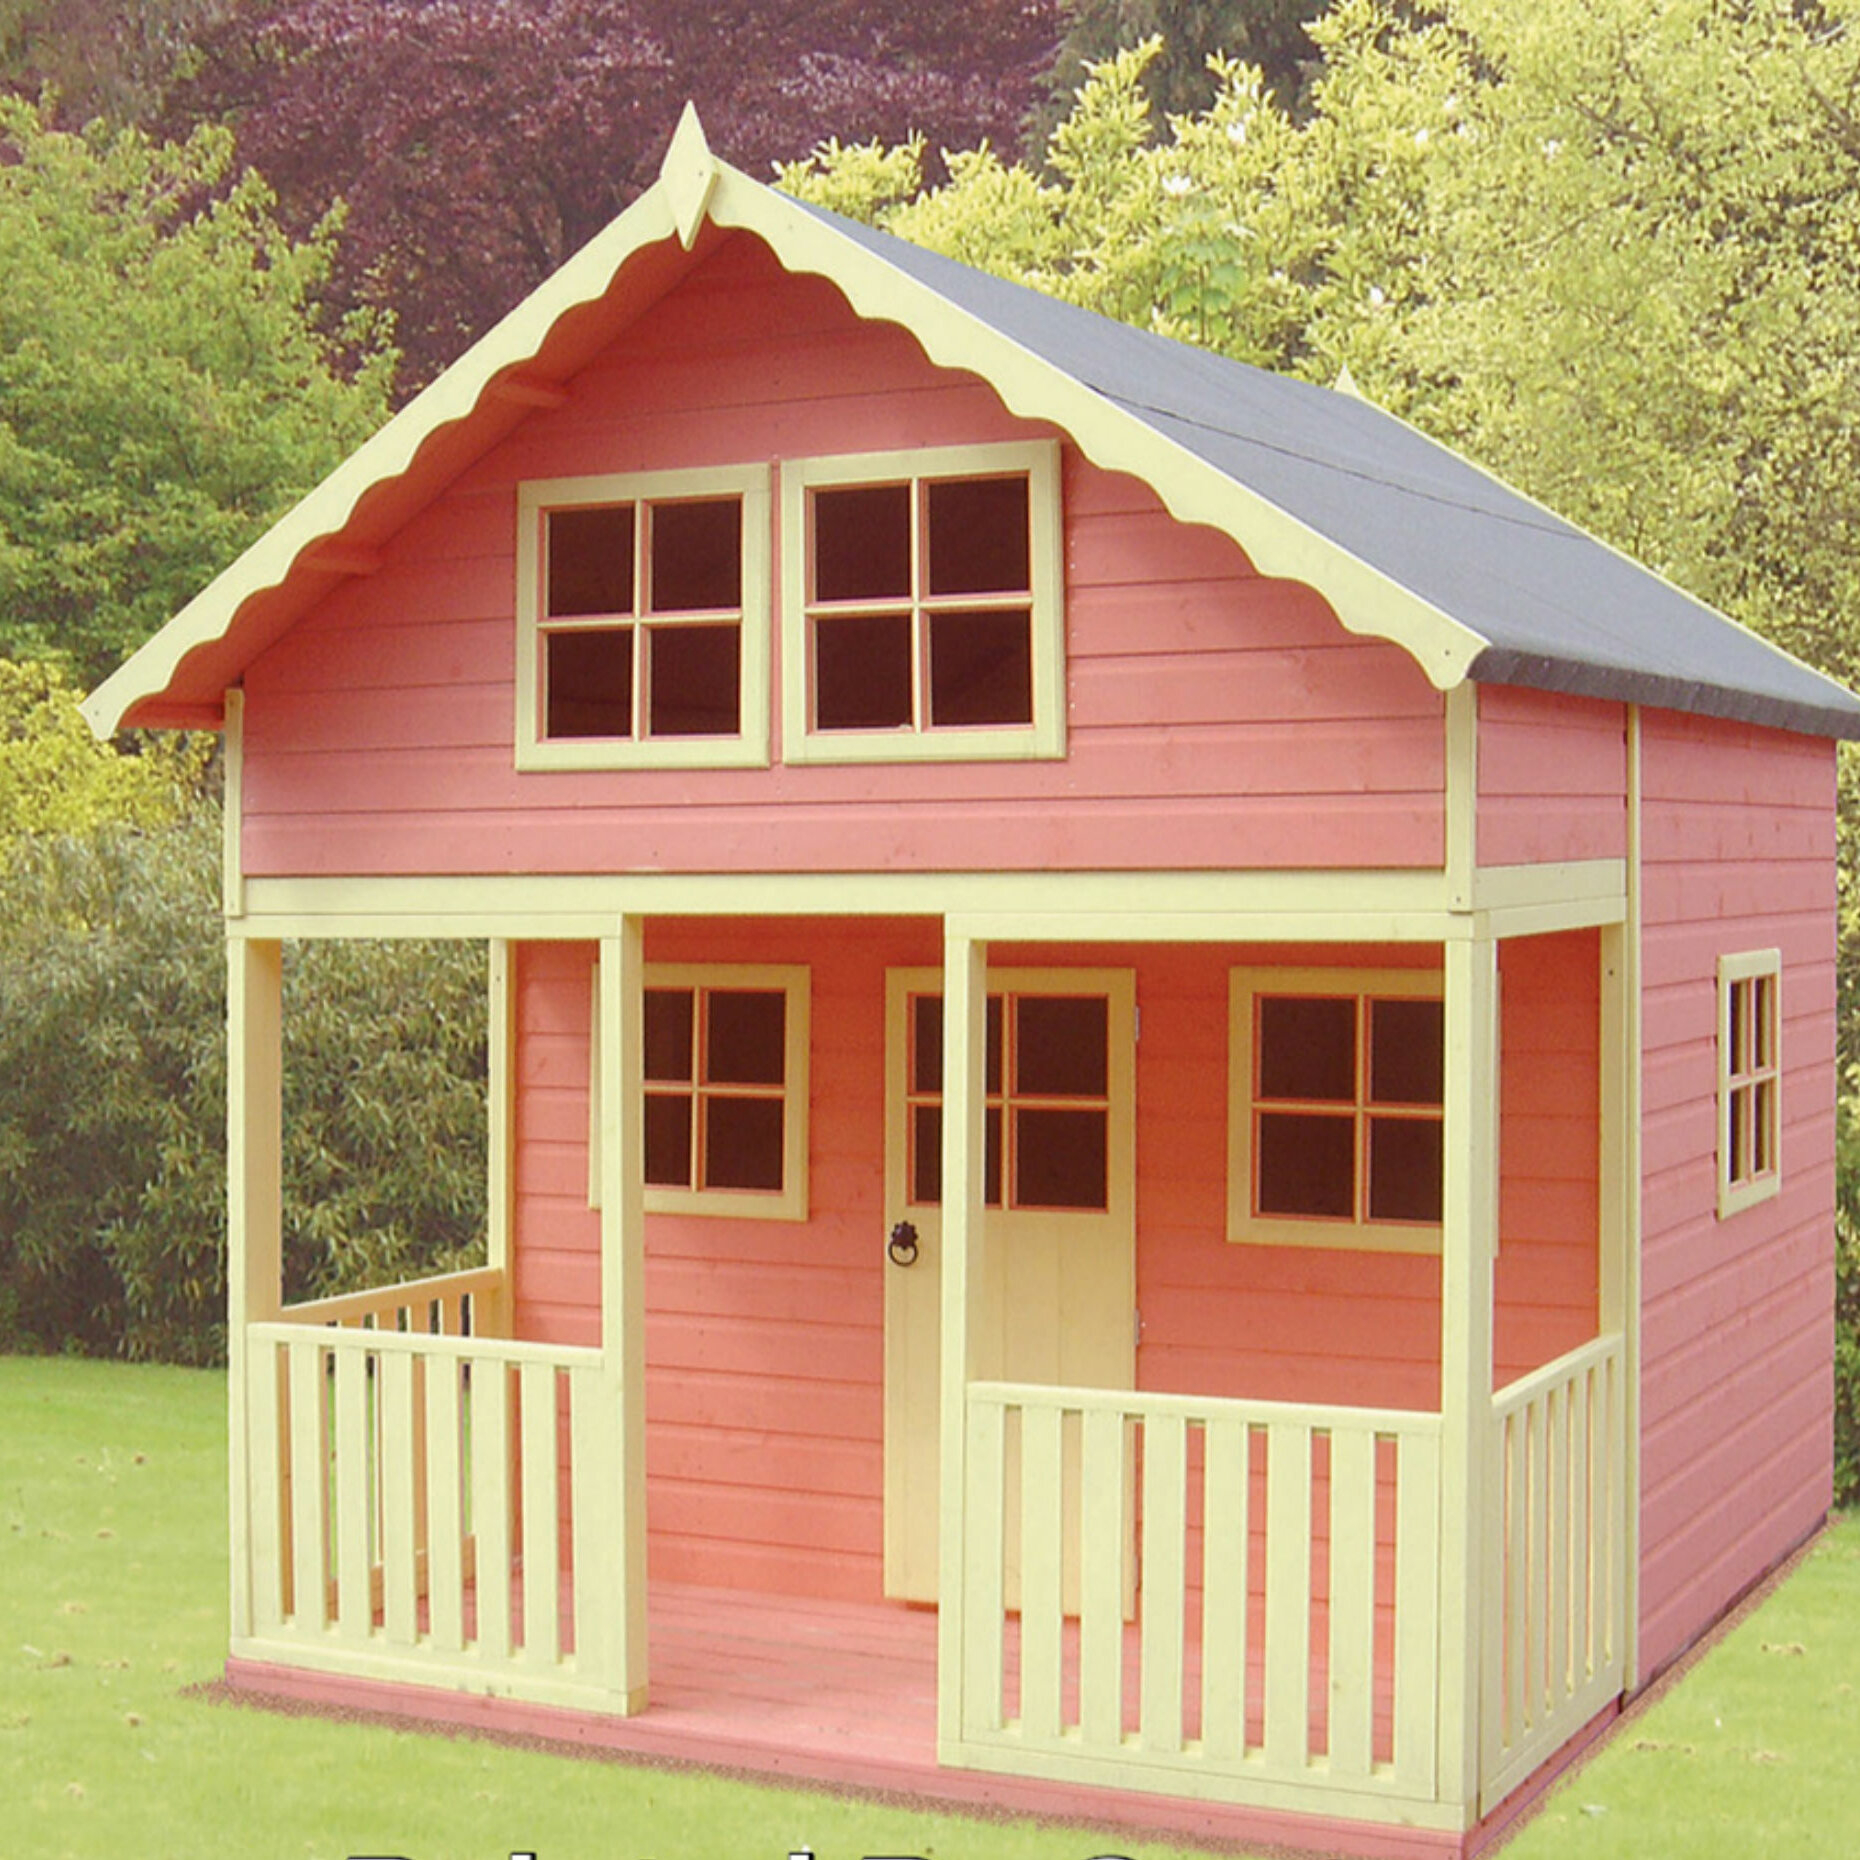 Wooden playhouse